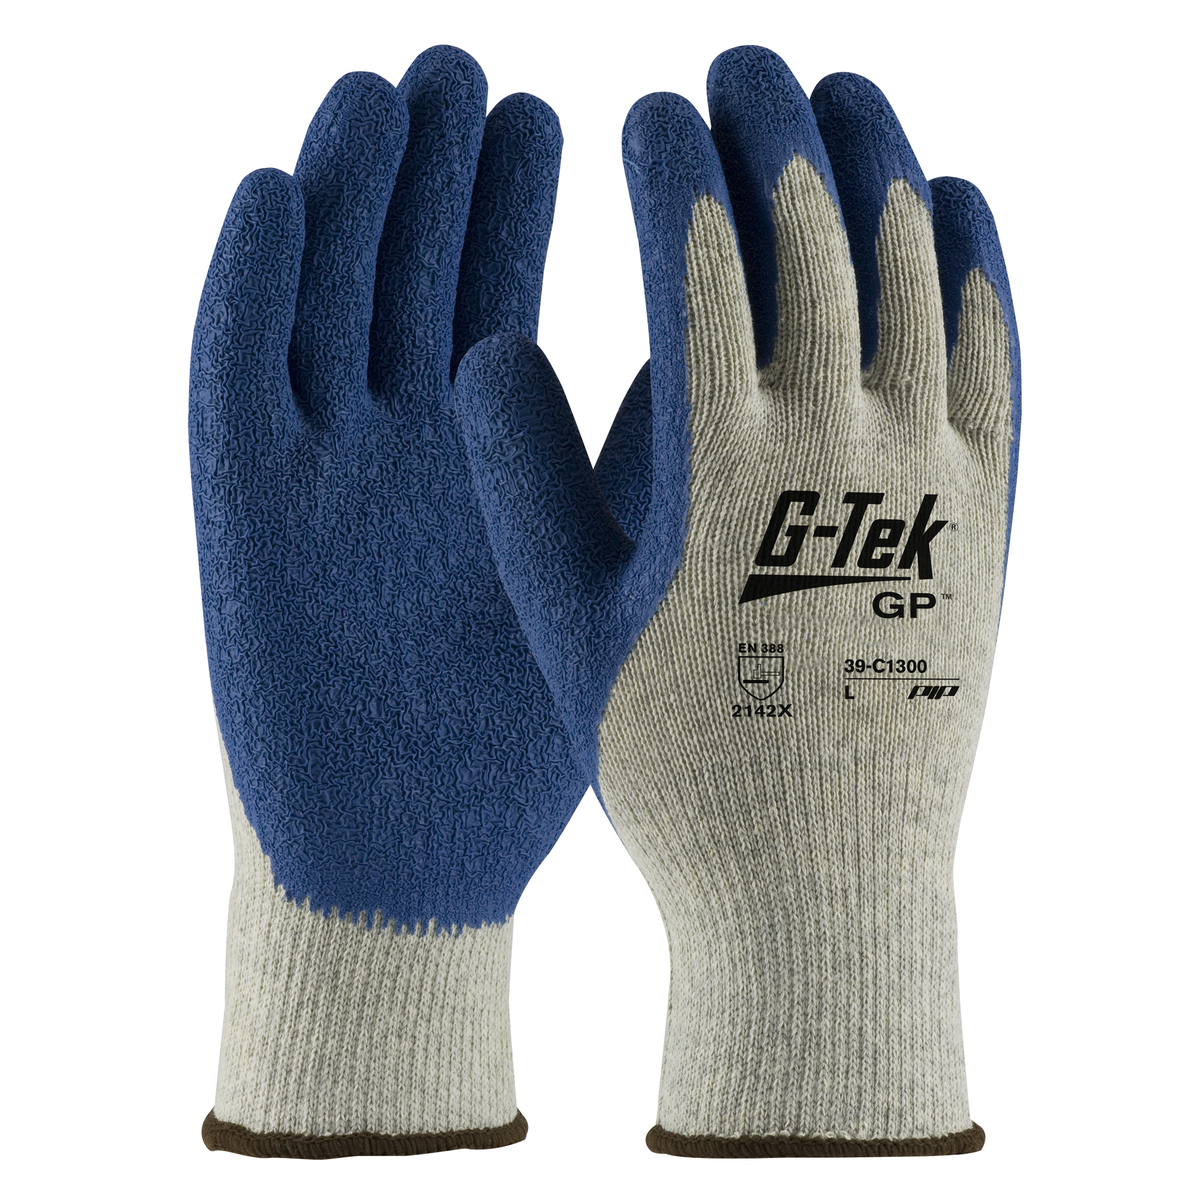 PIP® Small G-Tek® GP™ 10 Gauge Blue Nitrile Palm And Finger Coated Work Gloves With Polyester Liner And Continuous Knit Wrist